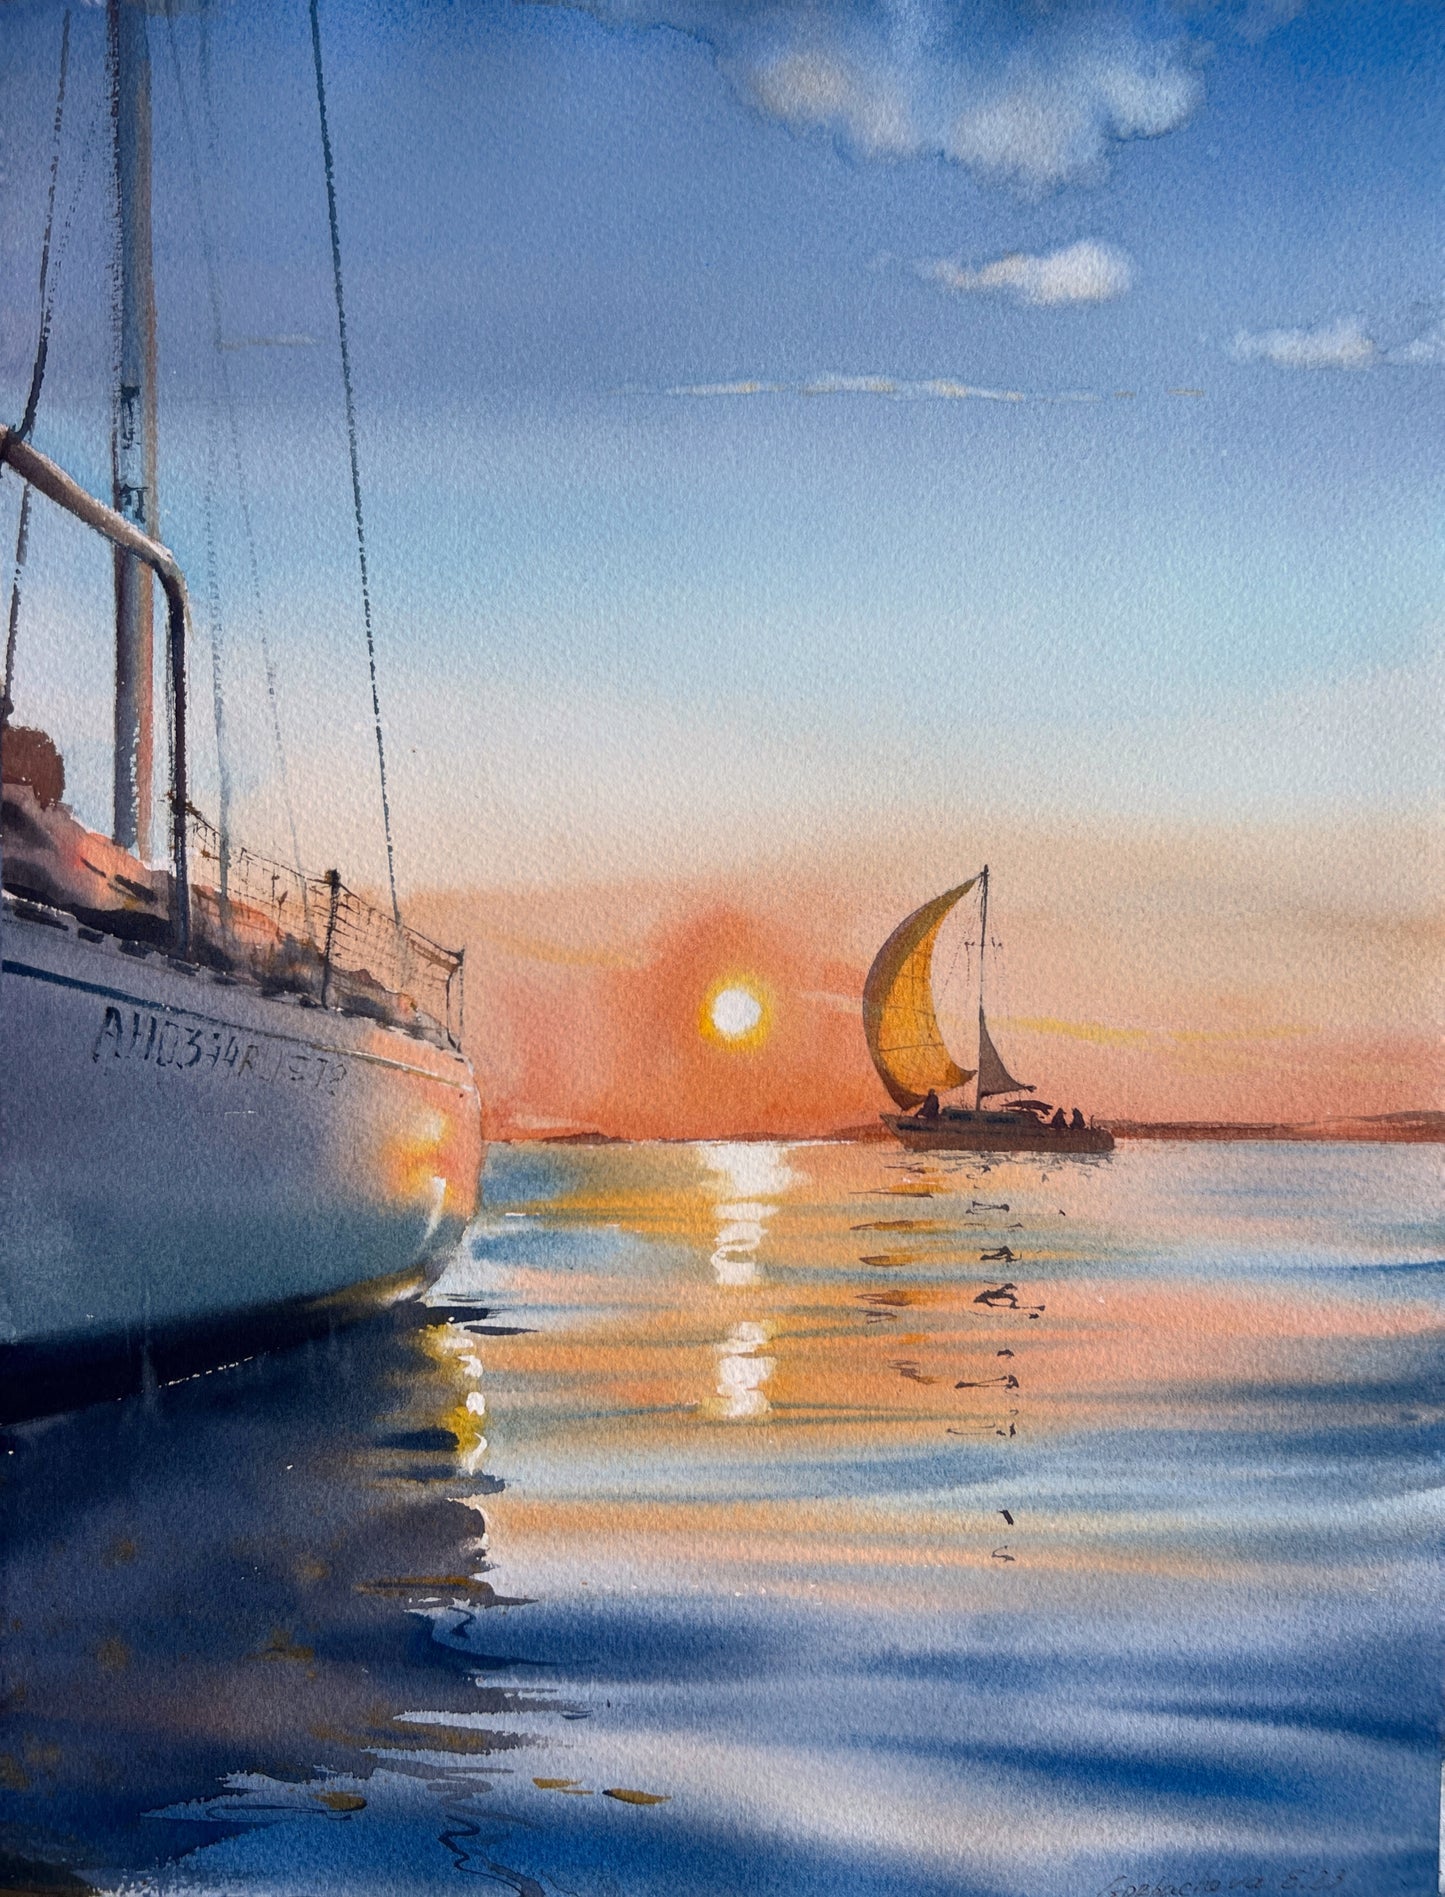 Original Seascape Watercolor Painting, Yacht Art and Sunset - Perfect Coastal Room Wall Decor and Gift for Sea Lovers